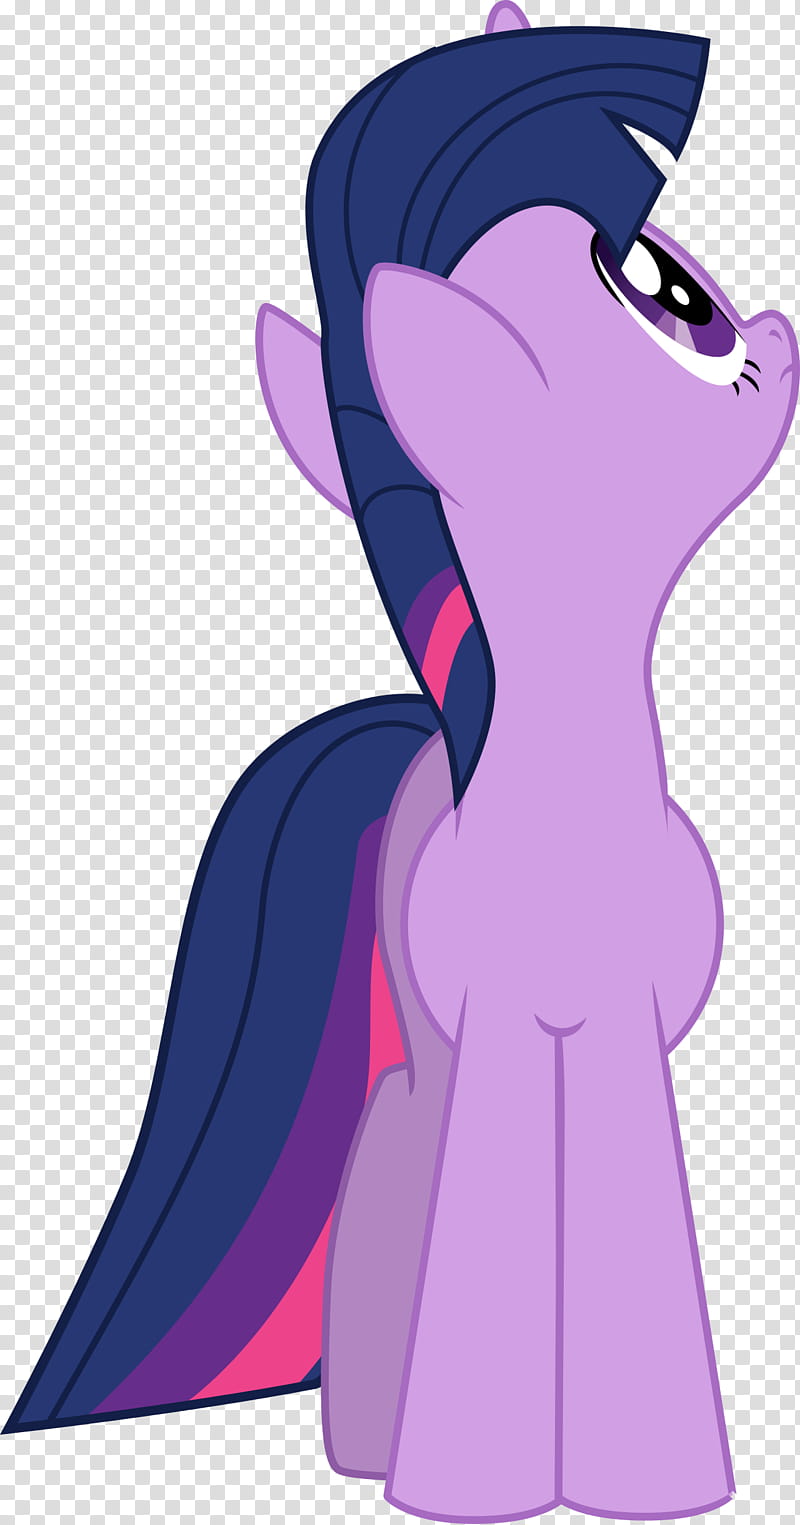 Twilight Looking Up, My Little Pony character illustration transparent background PNG clipart